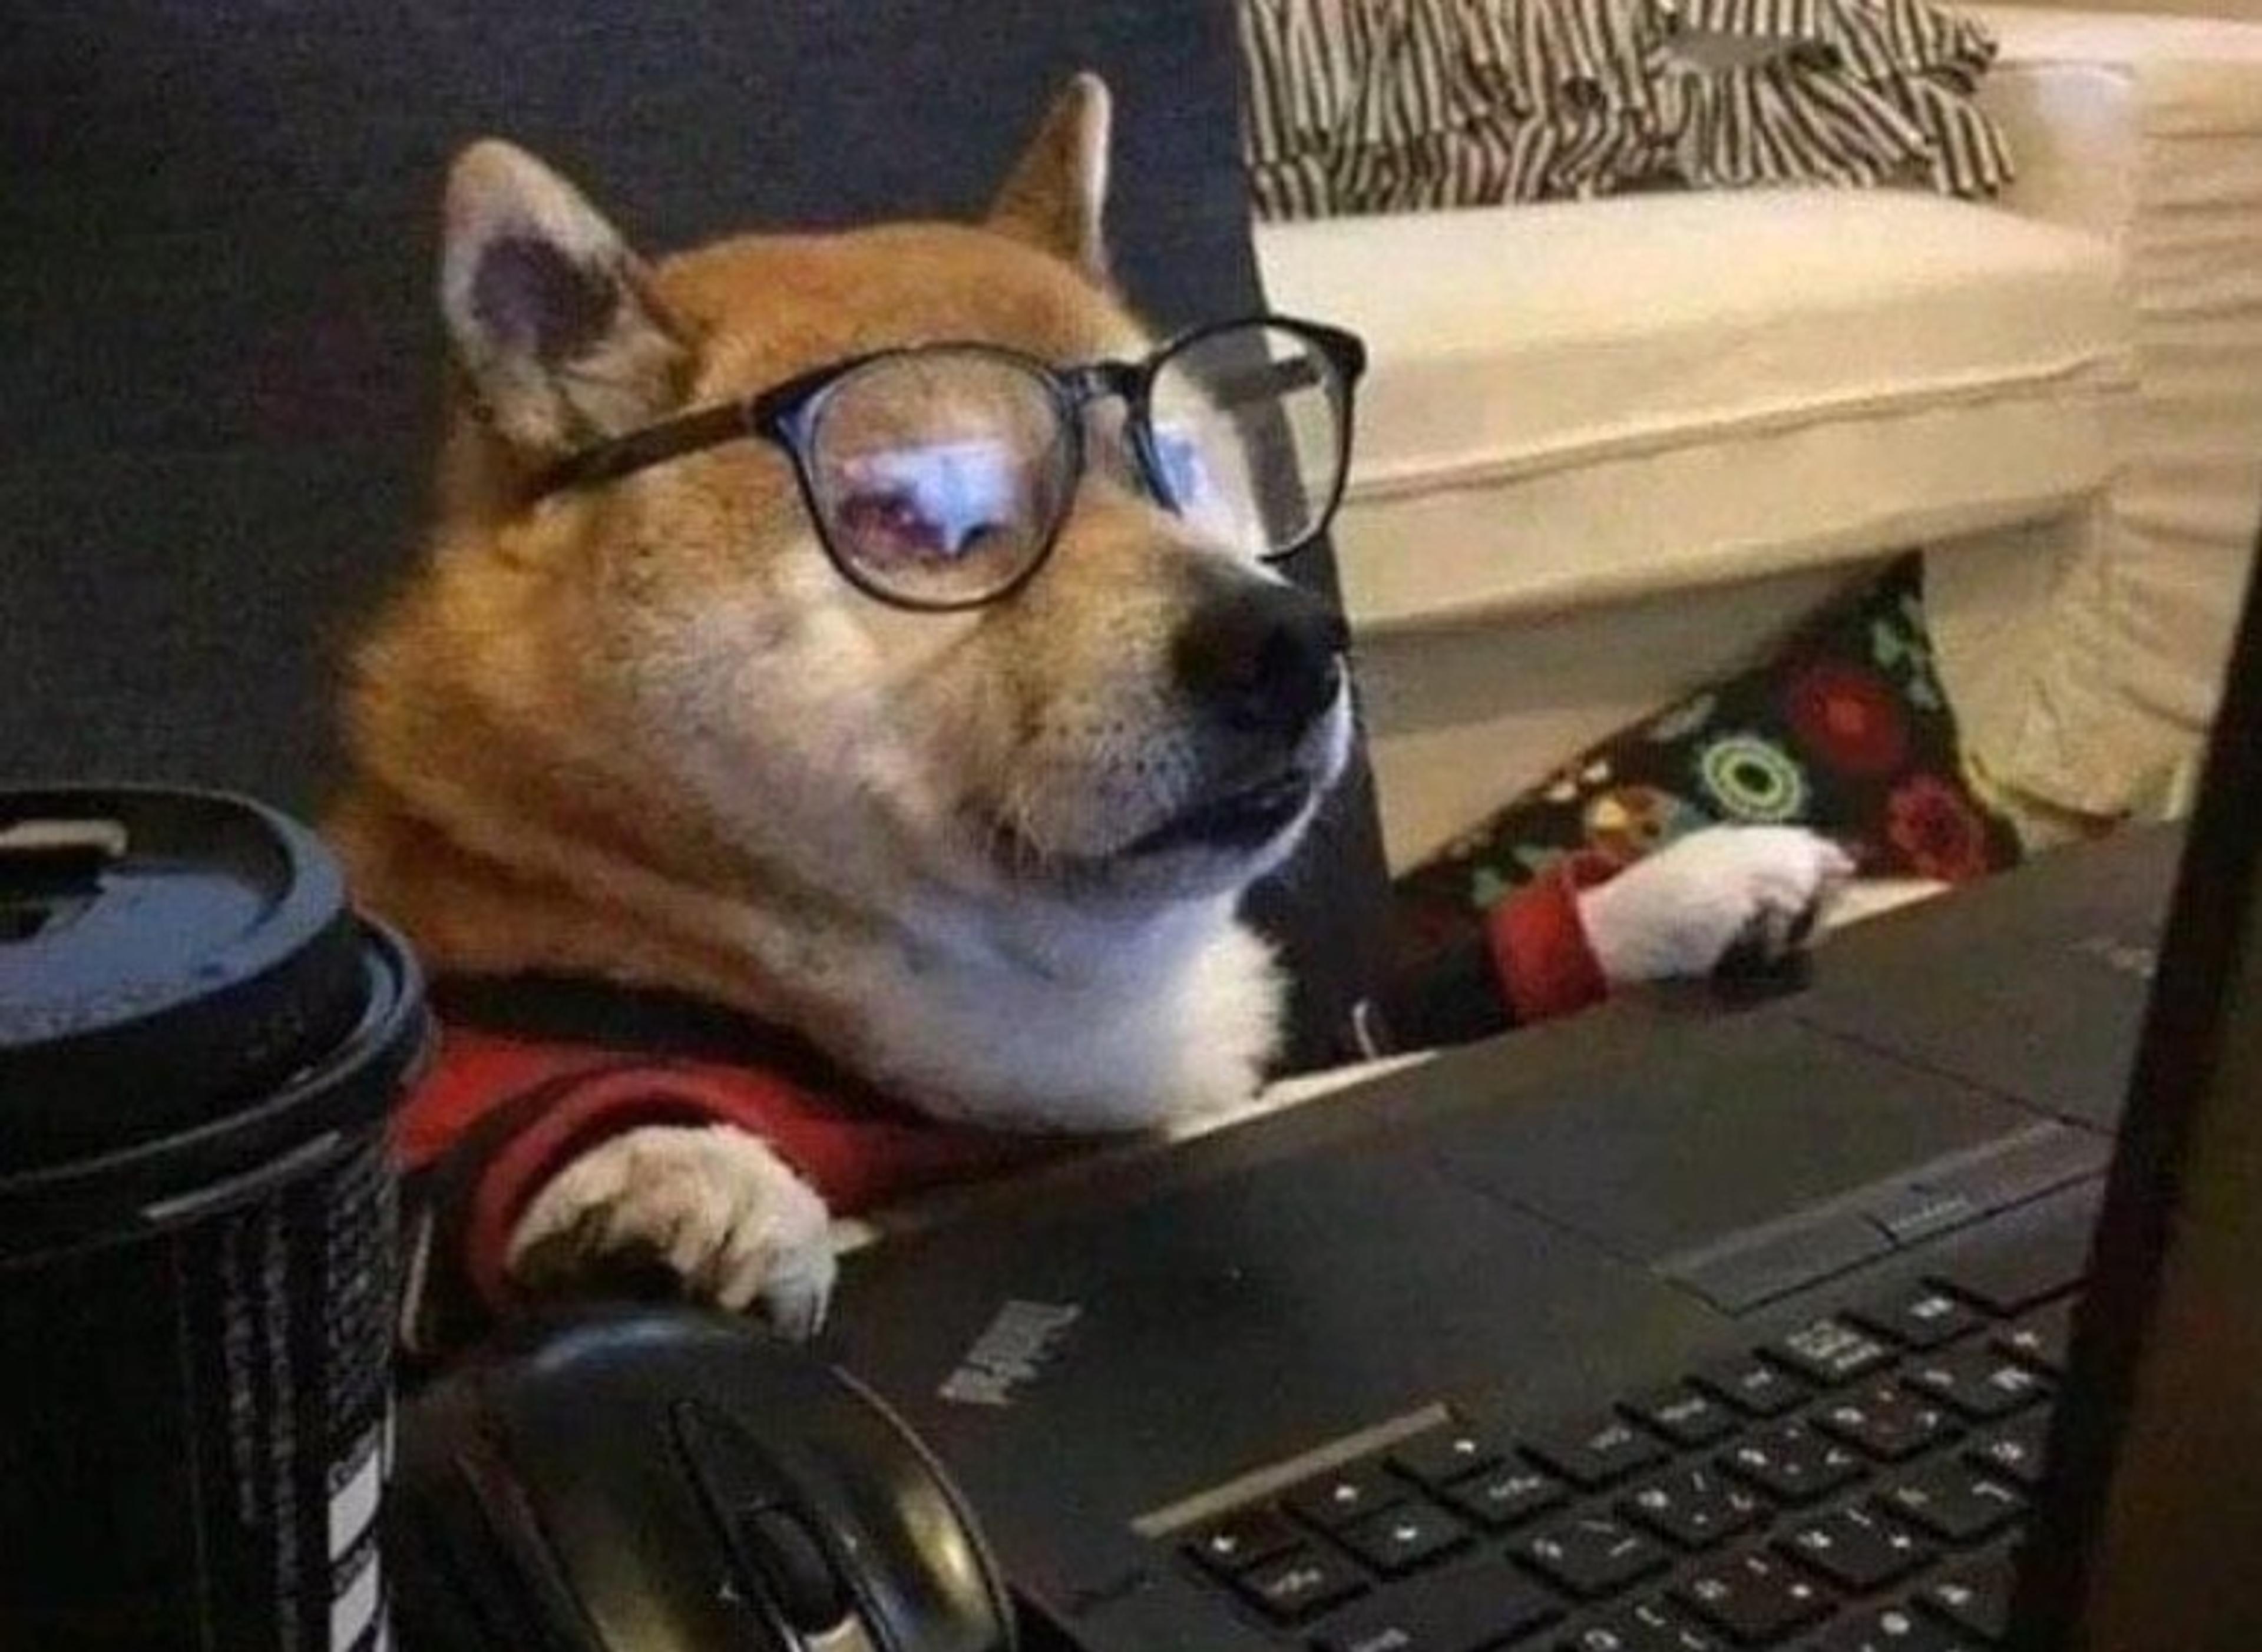 Dog wearing a sweater and glasses looking at a computer